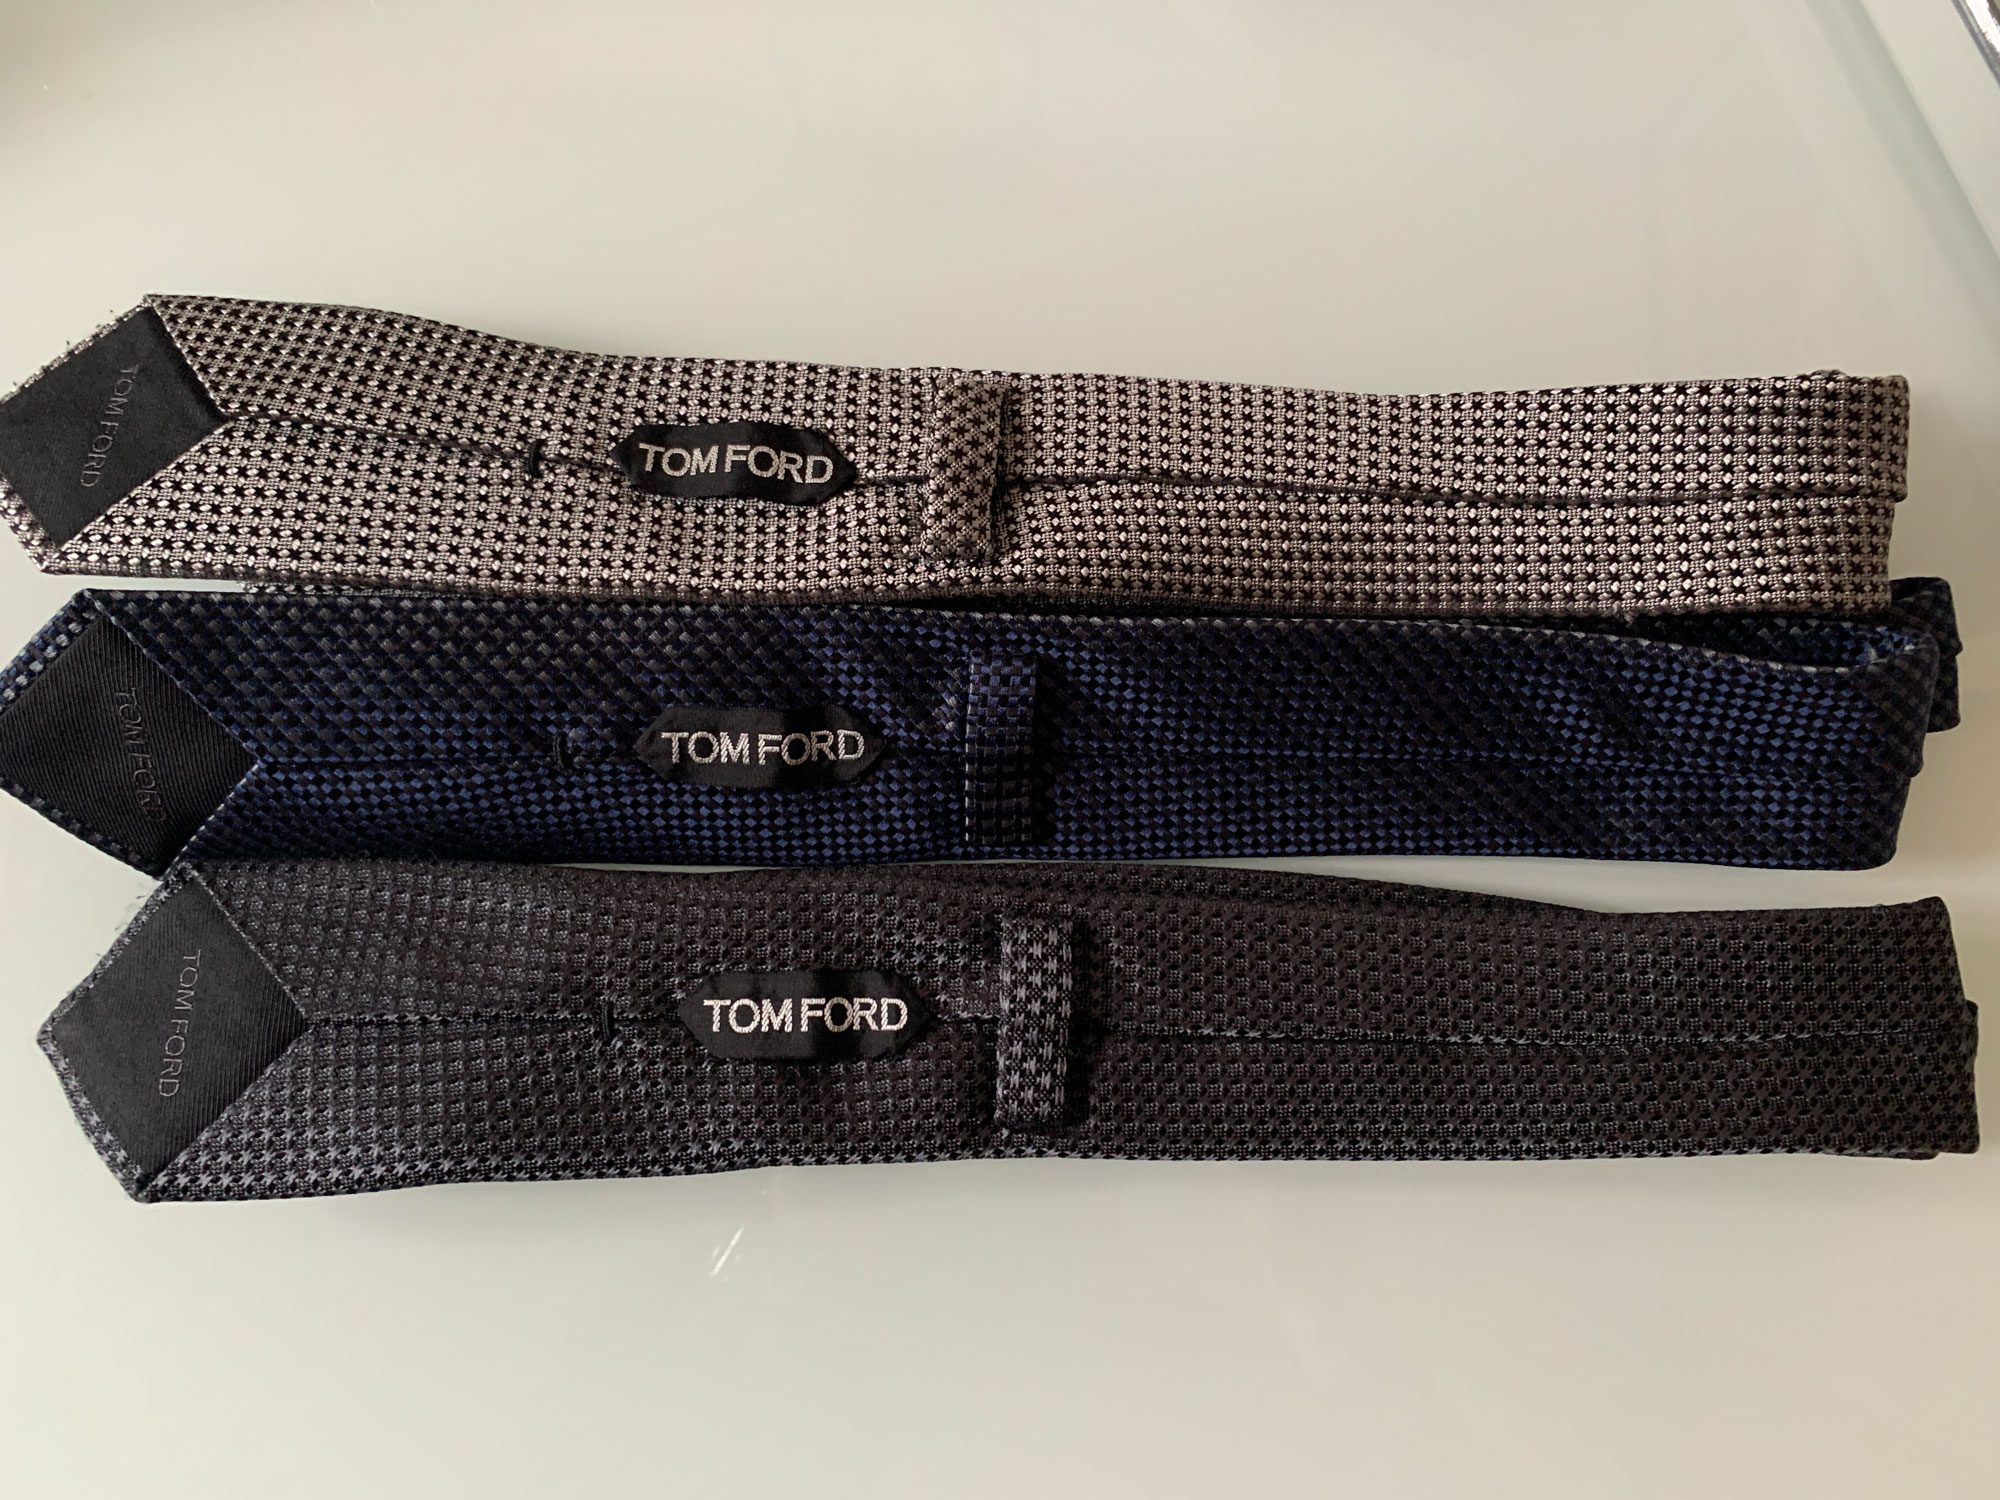 Skyfall ties with Tom Ford labels